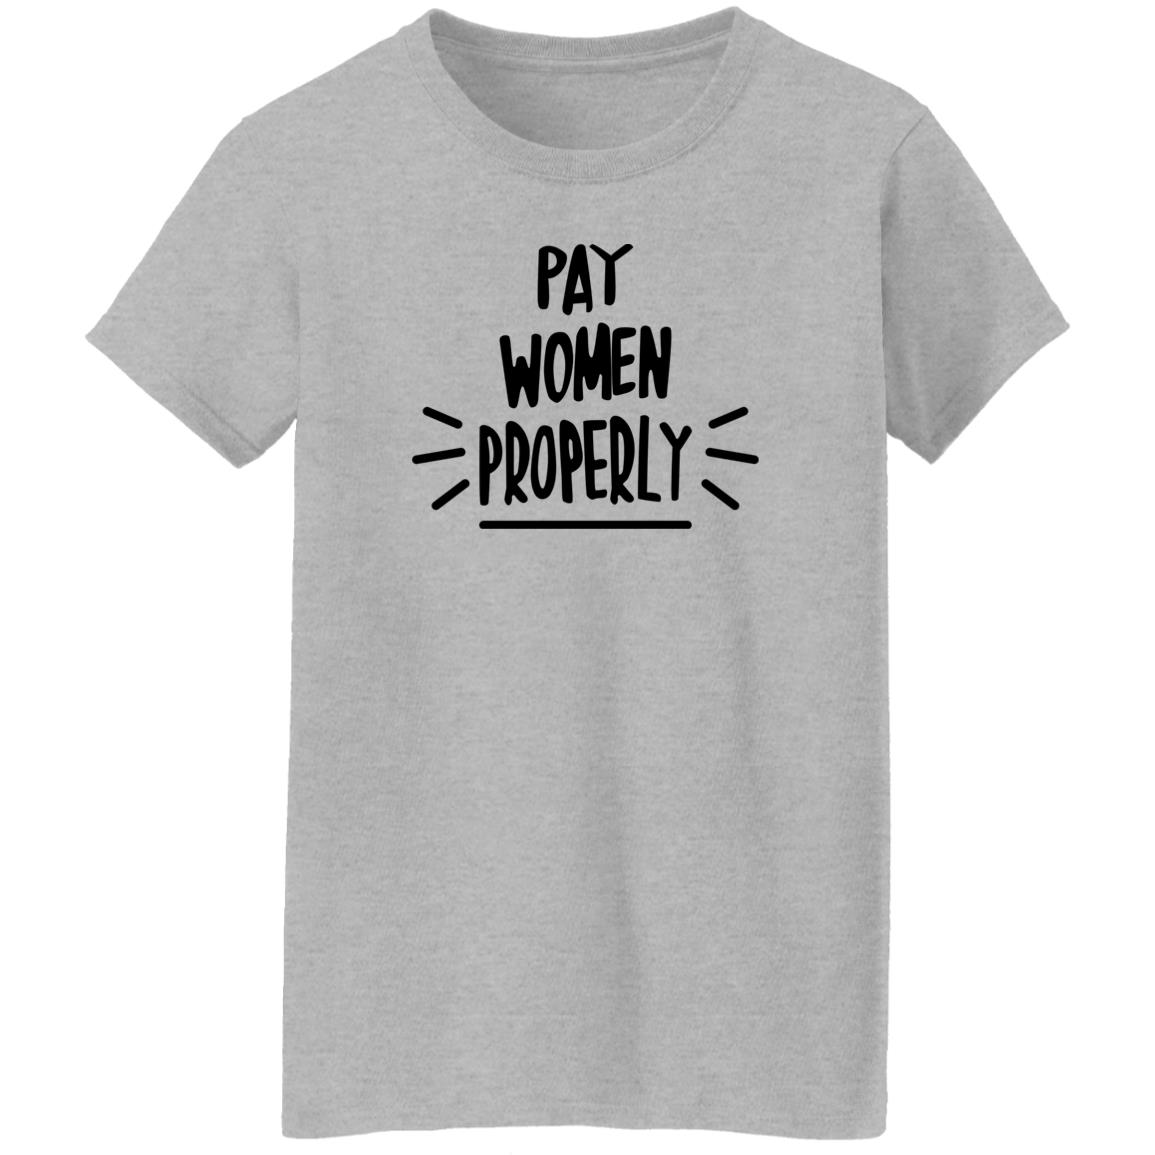 Pay Women Properly Shirt If You Aint Got It Just Say That Natalie Achonwa